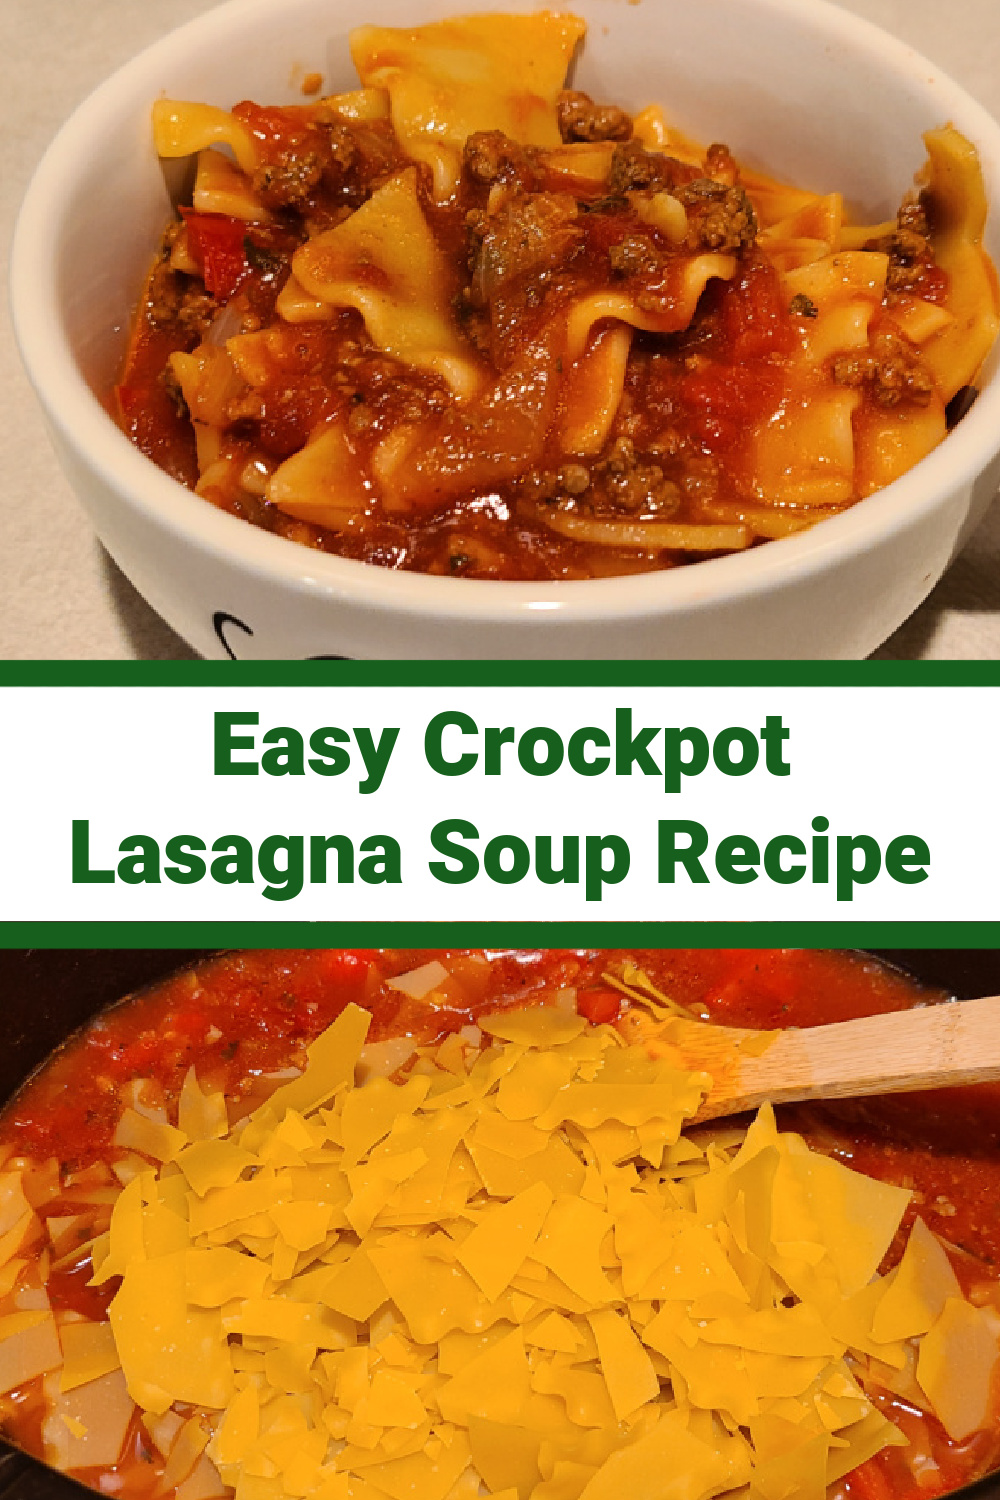 This Easy Crockpot Lasagna Soup Recipe is the perfect weeknight dinner! Comfort food ground beef and pasta can't be beaten for a filling easy dinner! You can change up the seasoning if you would like as well easily using base Italian seasonings. Add the cheese after to allow it to melt into the soup for a cheesy lasagna heavenly soup!